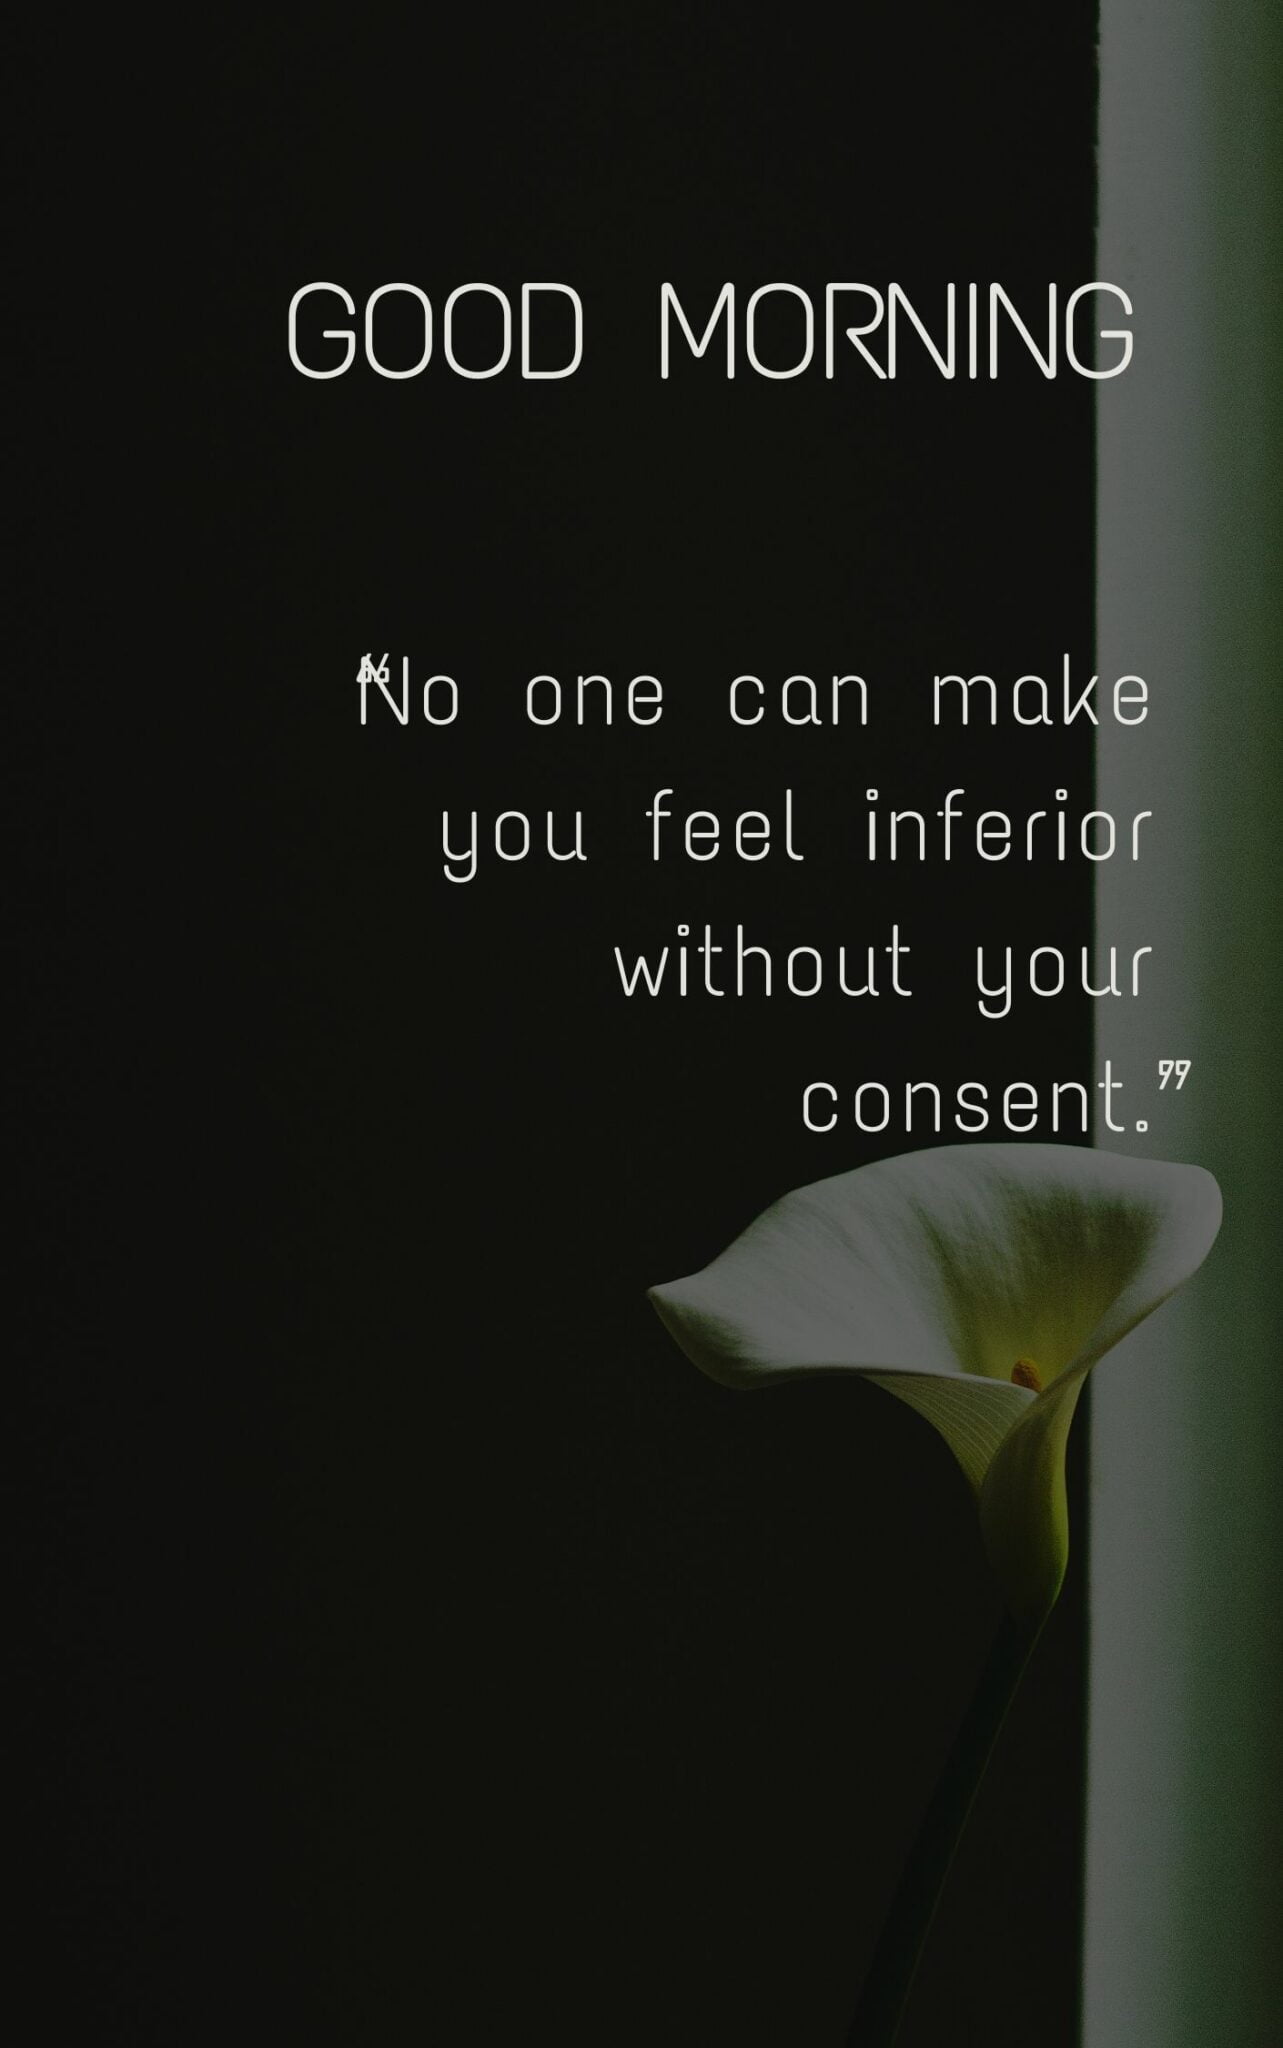 No one can make you feel inferior without your consent Quote Good Morning Image